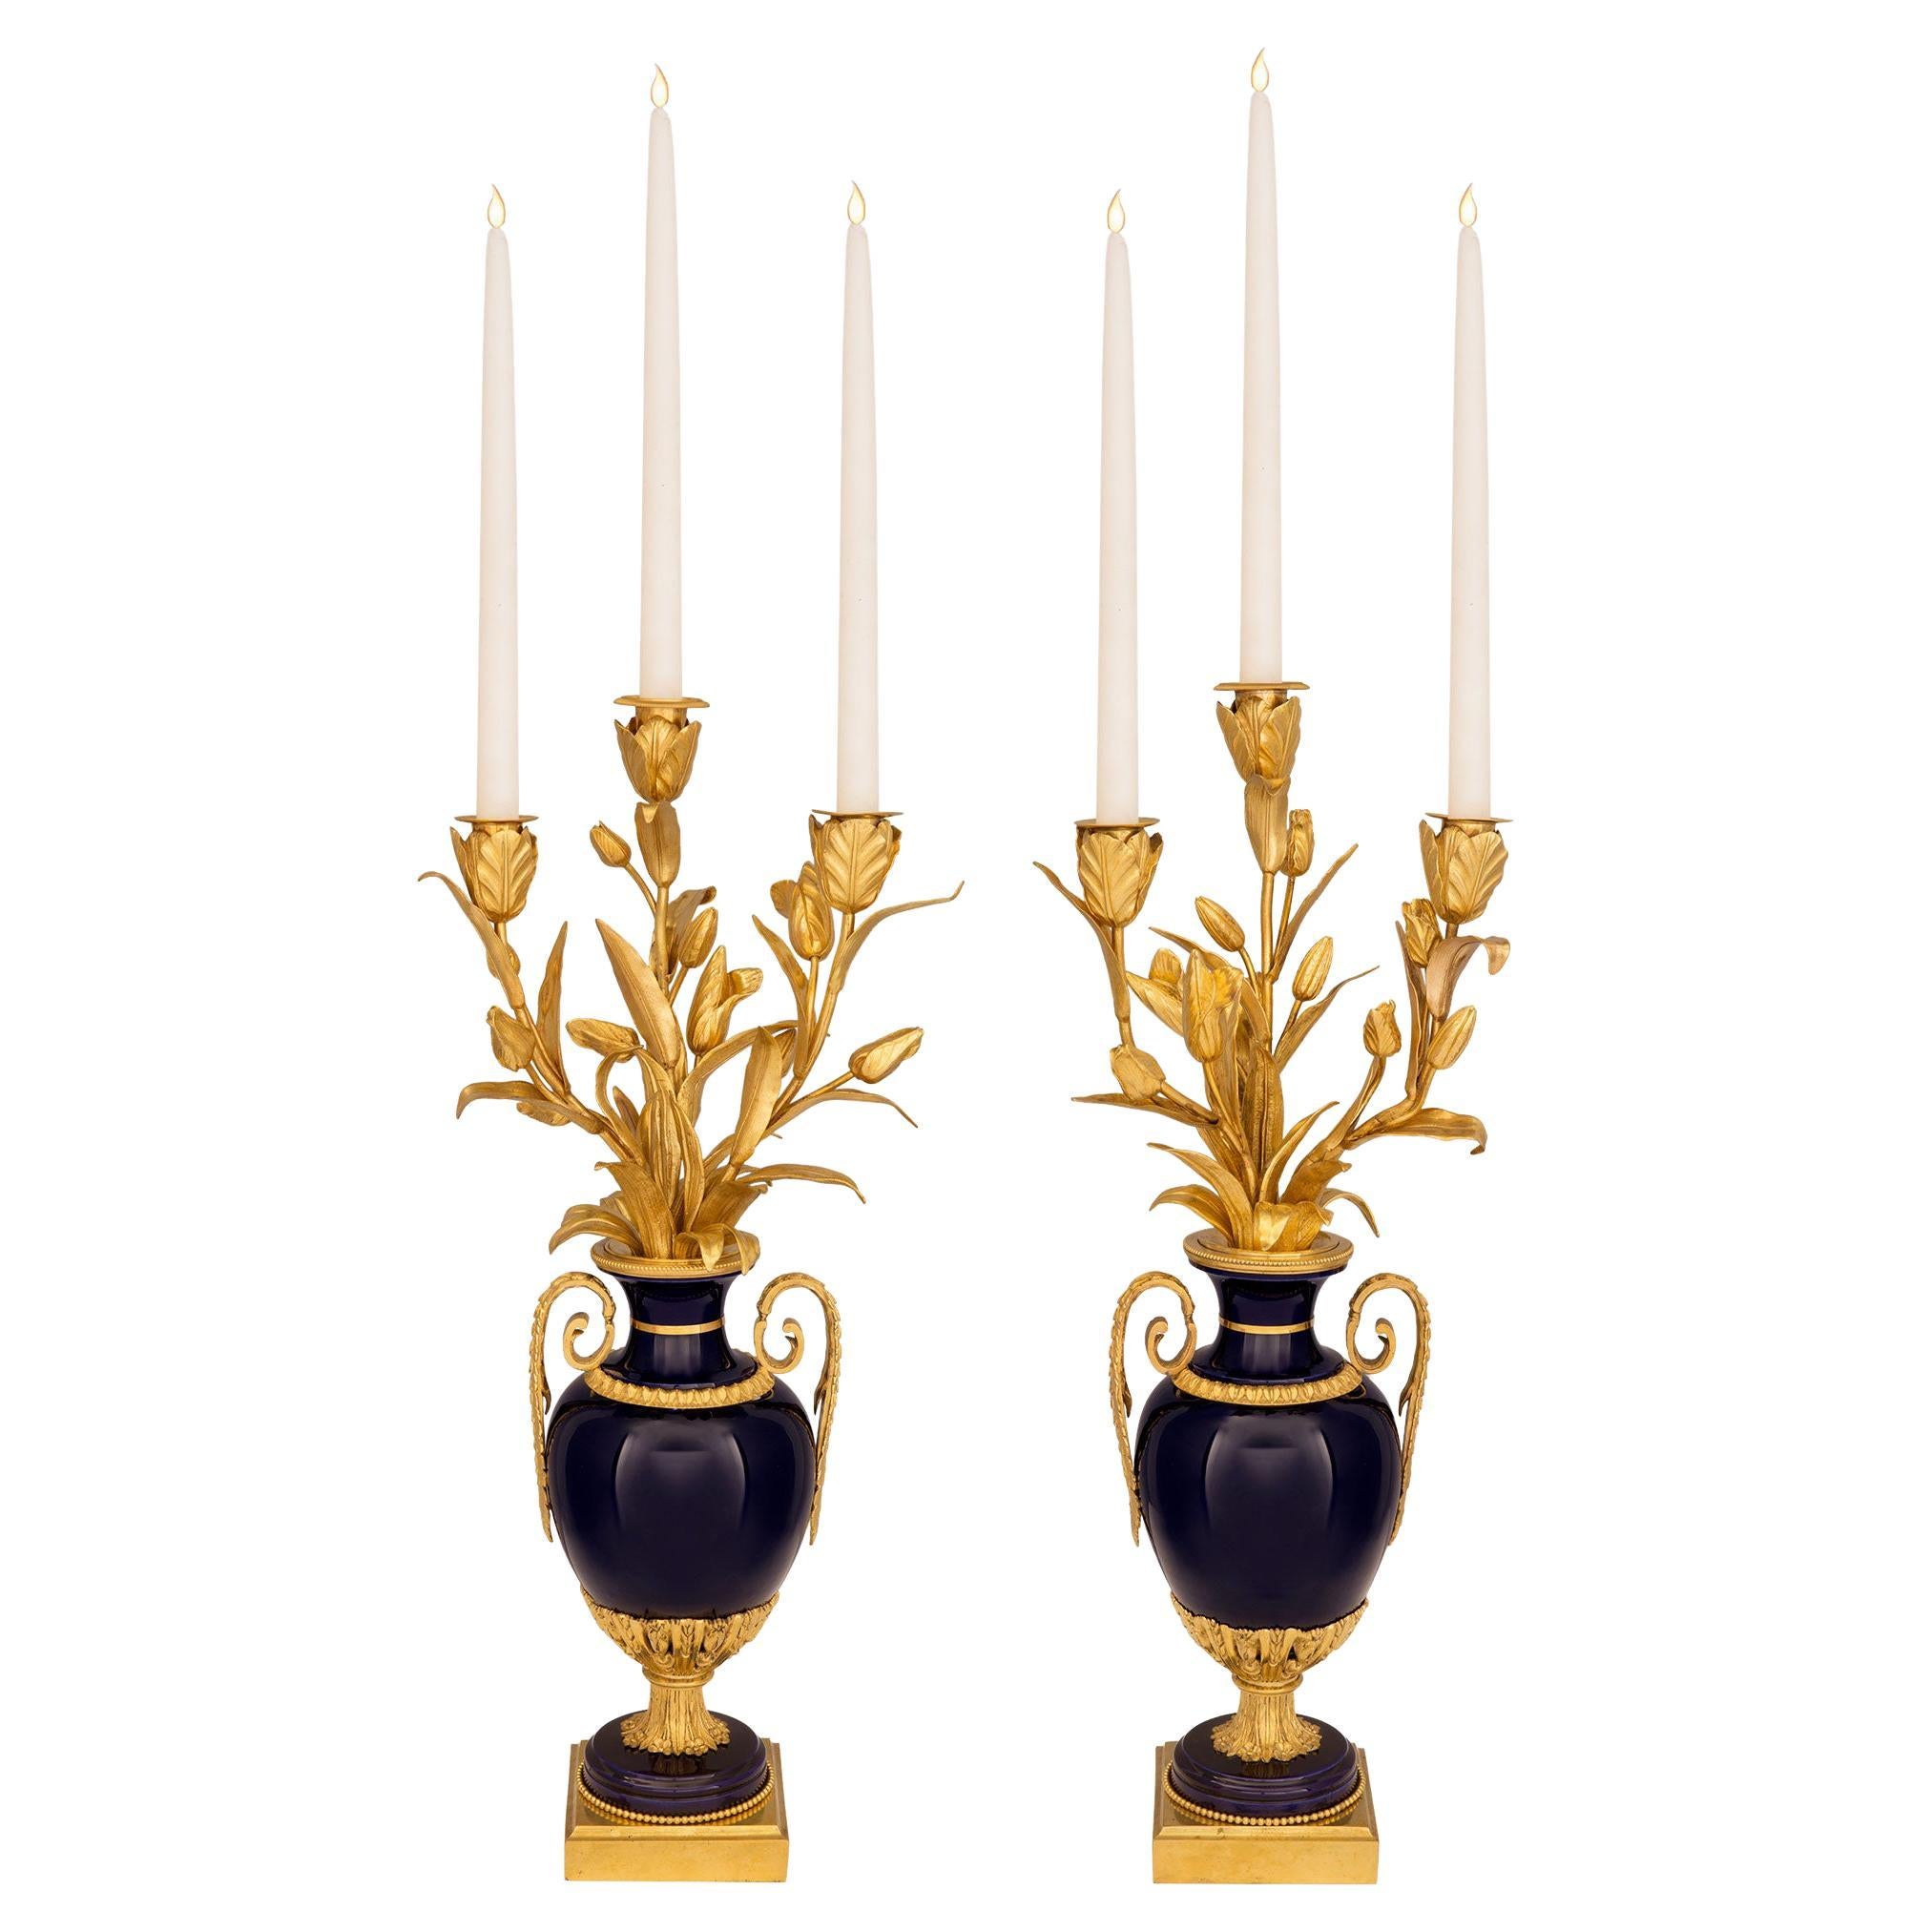 Pair of French Early 19th Century Louis XVI St. Porcelain and Ormolu Candelabras